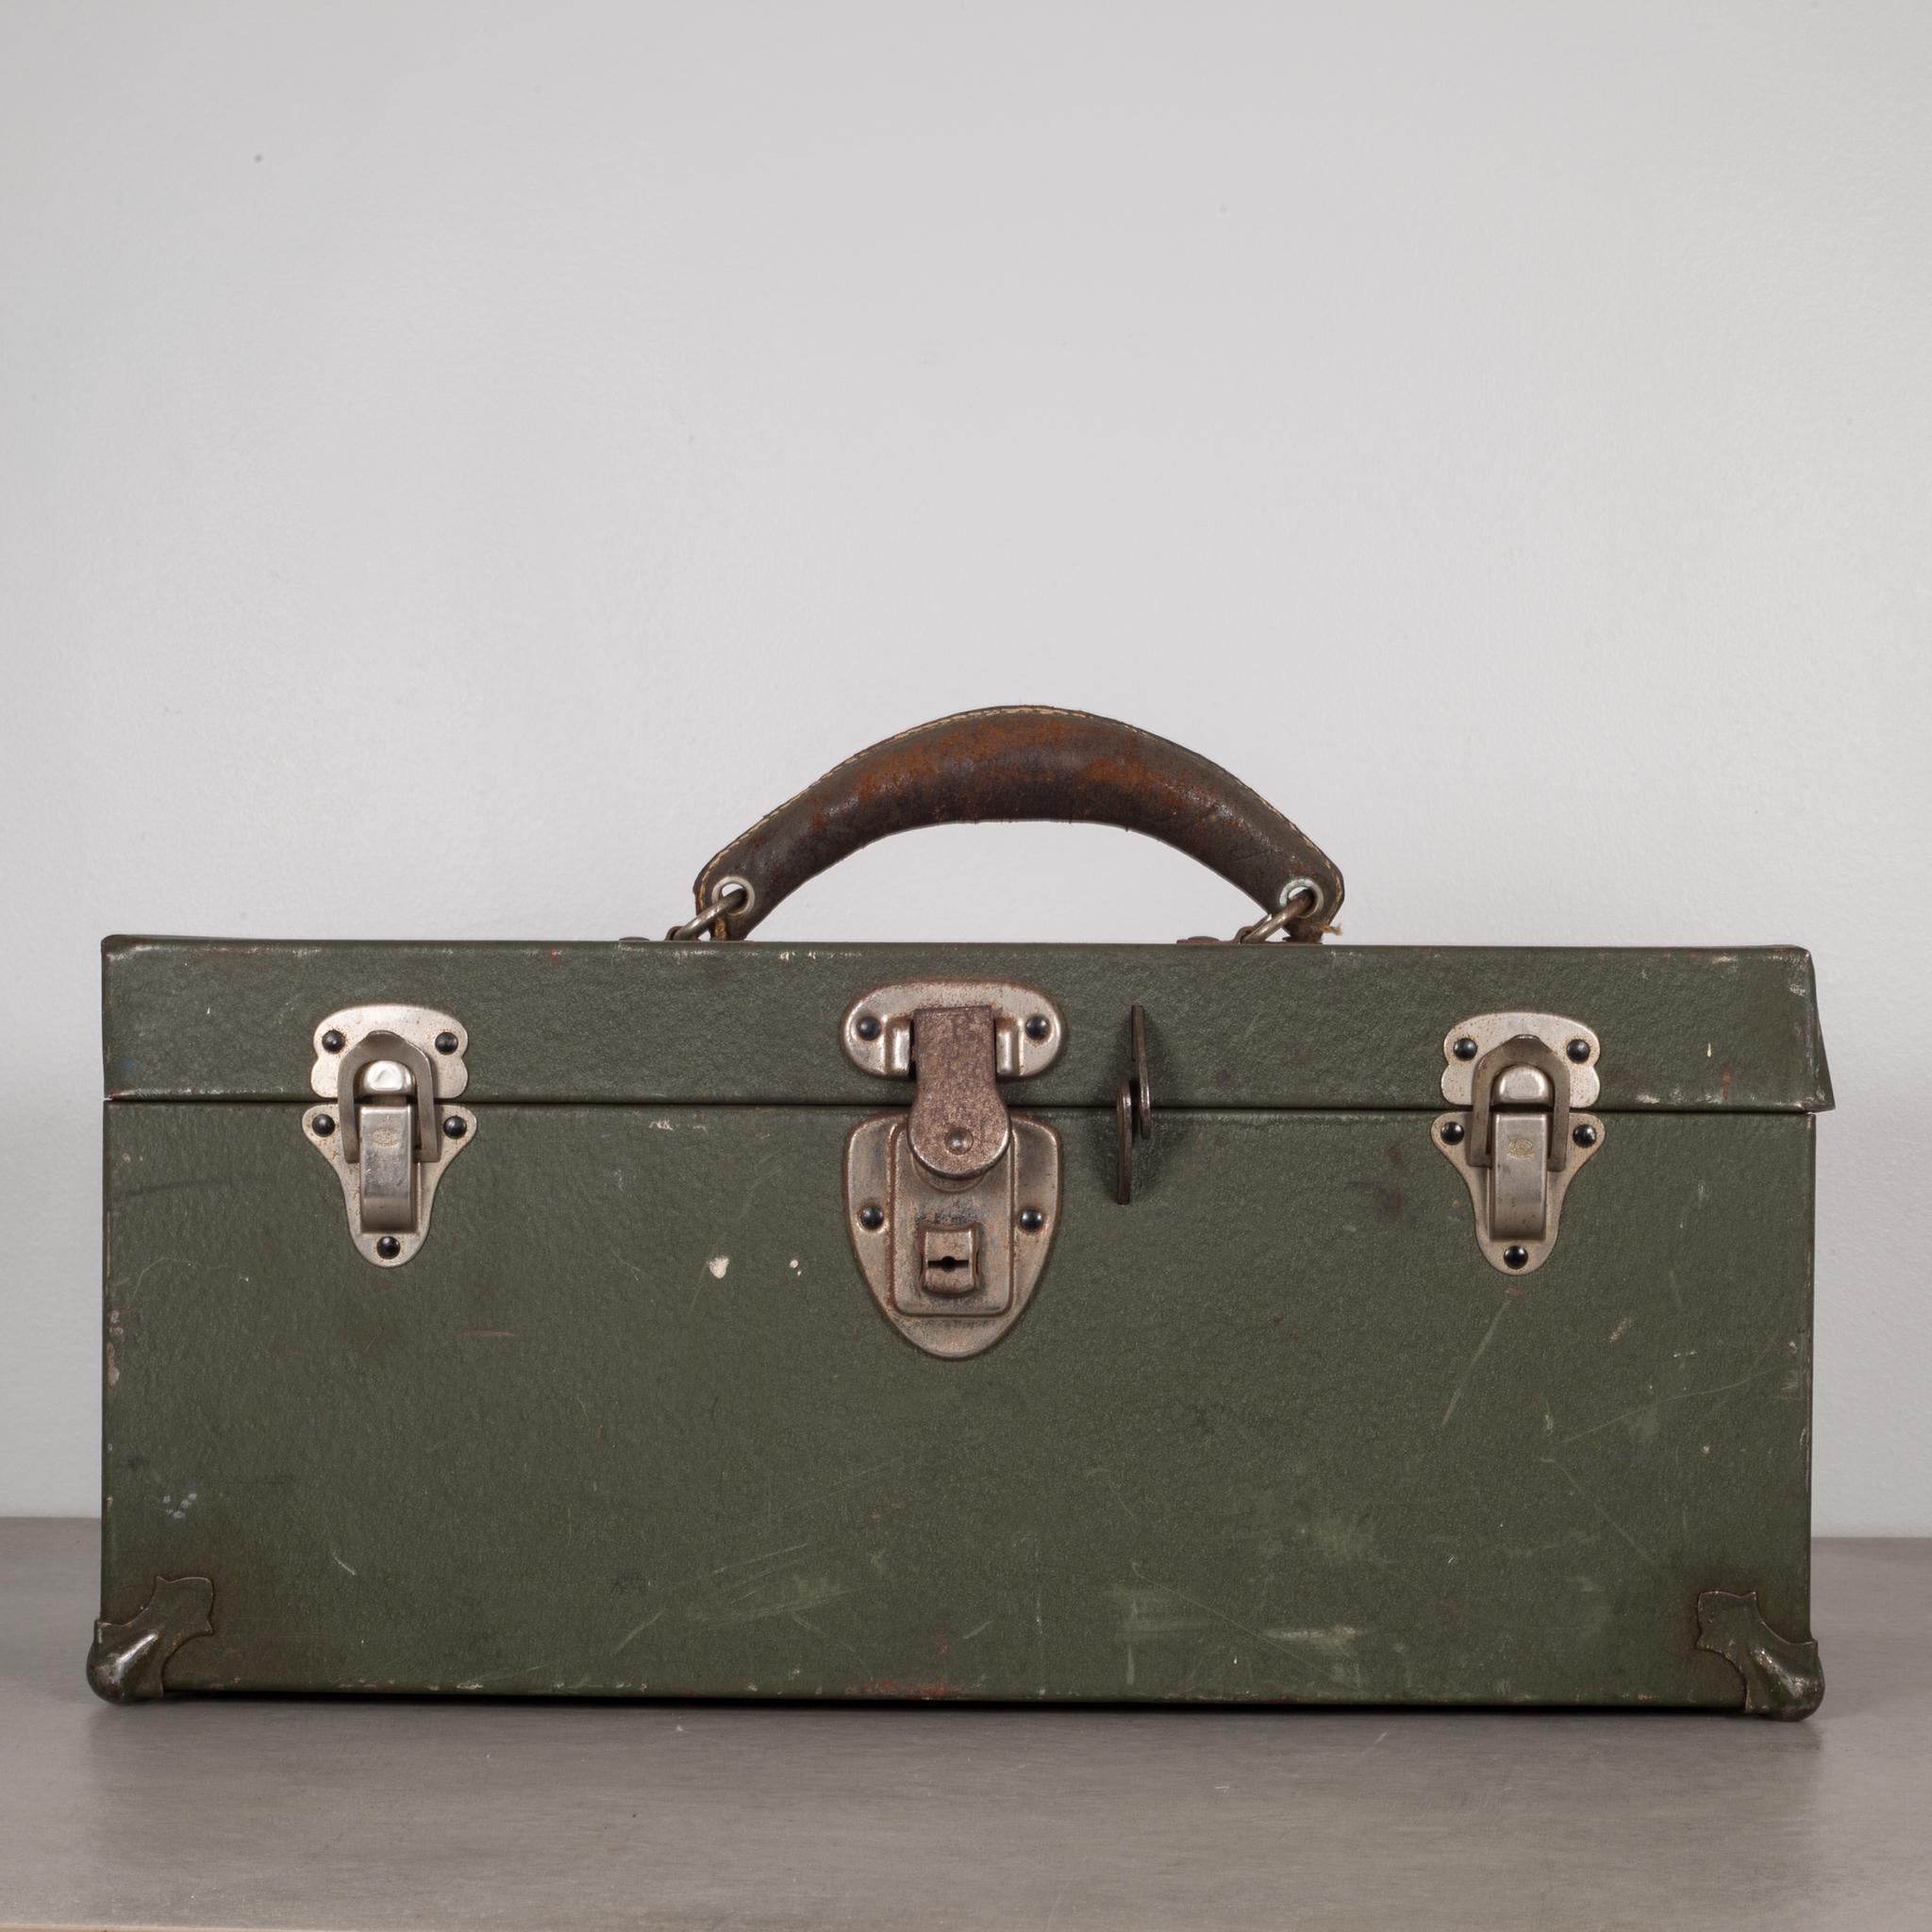 About

This is an original Kennedy Kit toolbox. A metal toolbox with three latches and a distressed leather handle. The main thumb latch works properly but there is no key. This piece has retained its original army green finish and has the proper